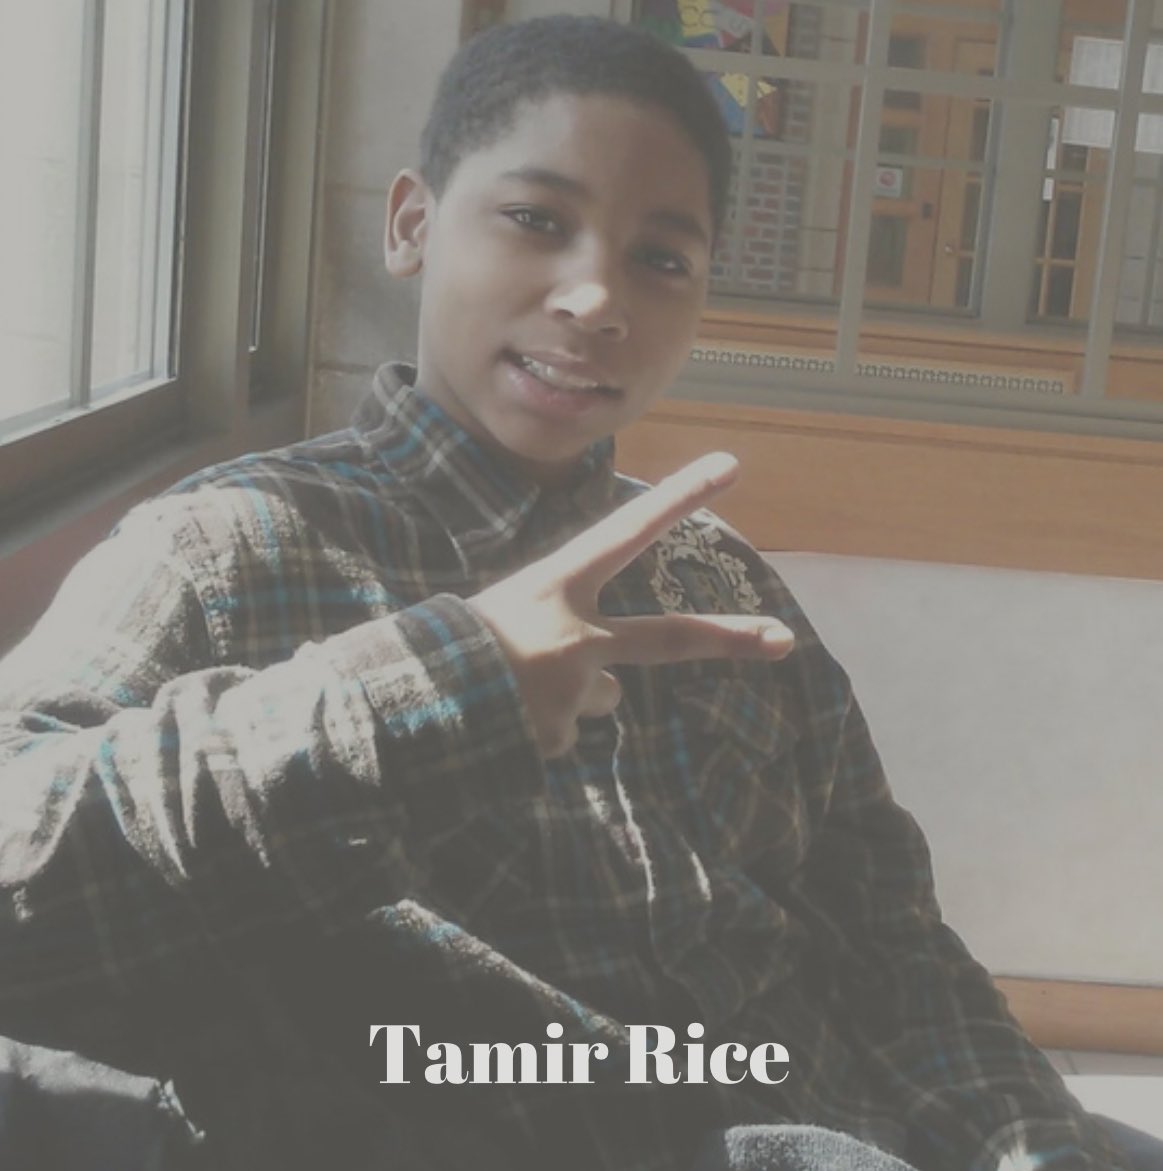 #TamirRice, whose 12-year-old life was ended abruptly by a police officer who shot  & killed Tamir as he held a replica toy gun, should be celebrating his 20th birthday today.

Hanging with friends
Building his dreams
Hugging his mother

My heart goes out to Ms. Samaria Rice.